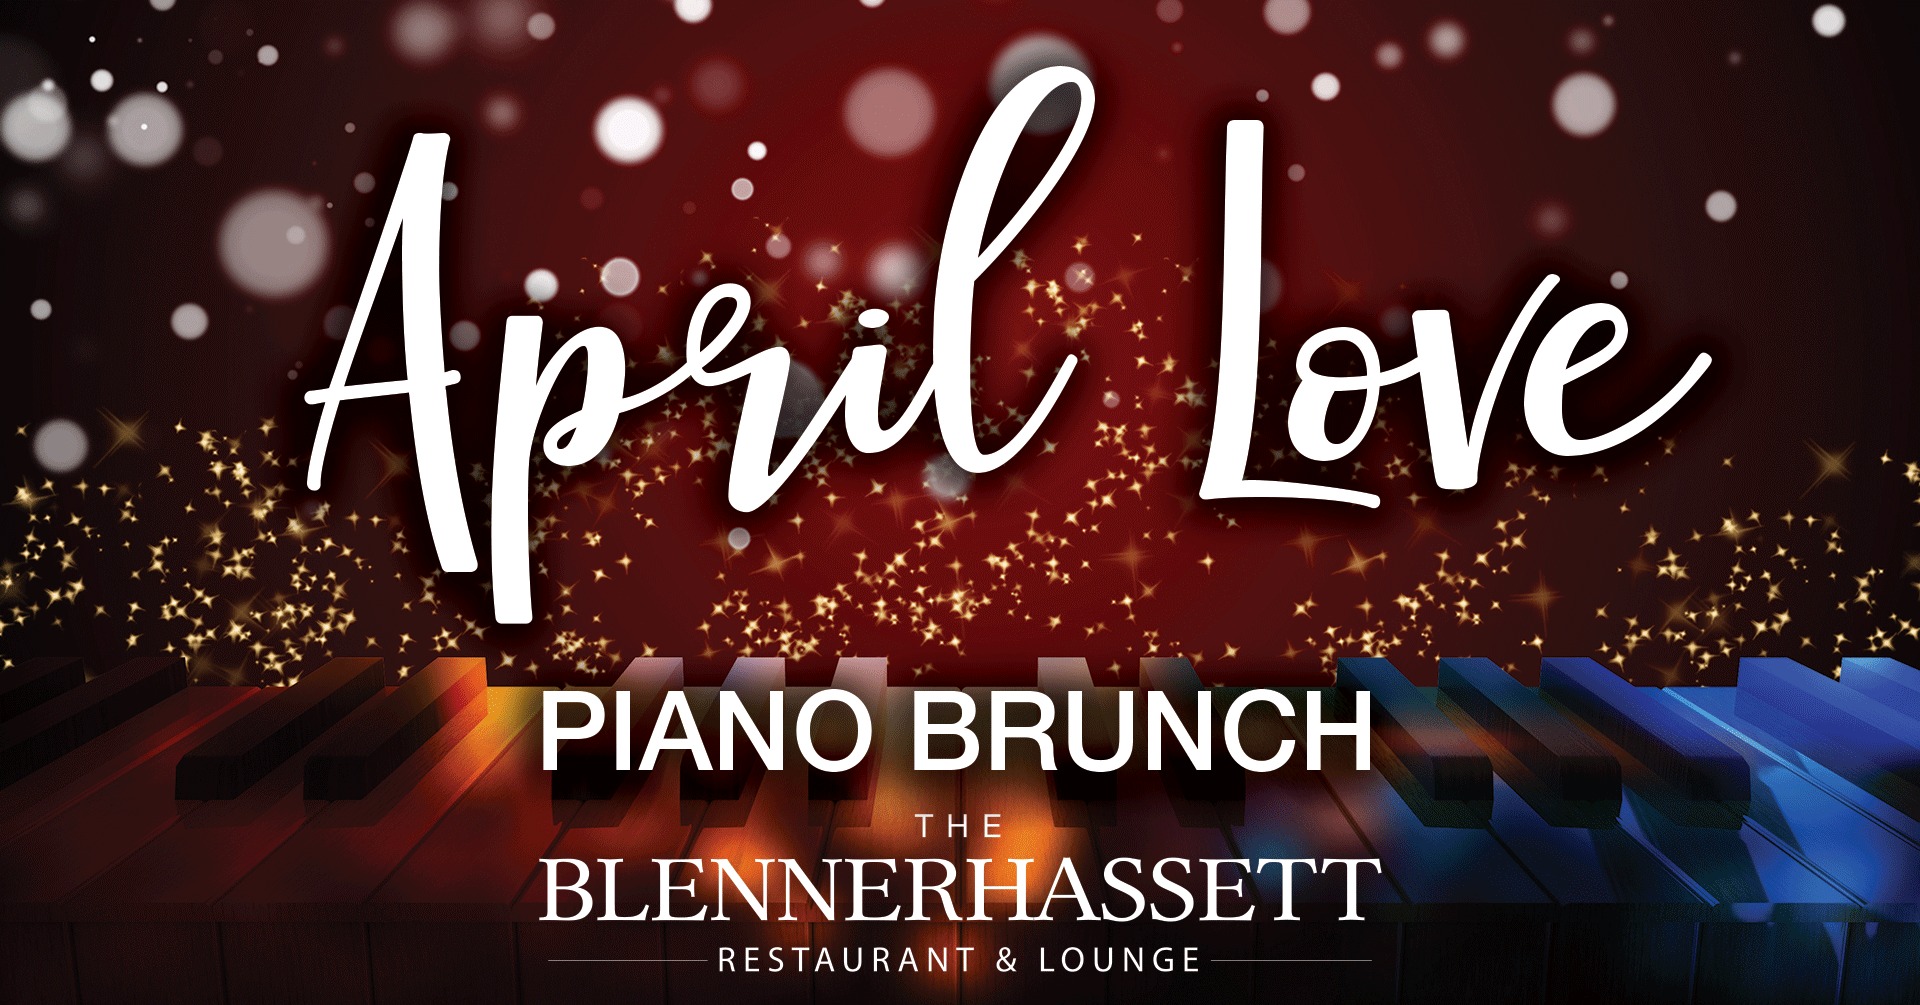 April Love plays Piano Brunch at The Blennerhassett Restaurant and Lounge